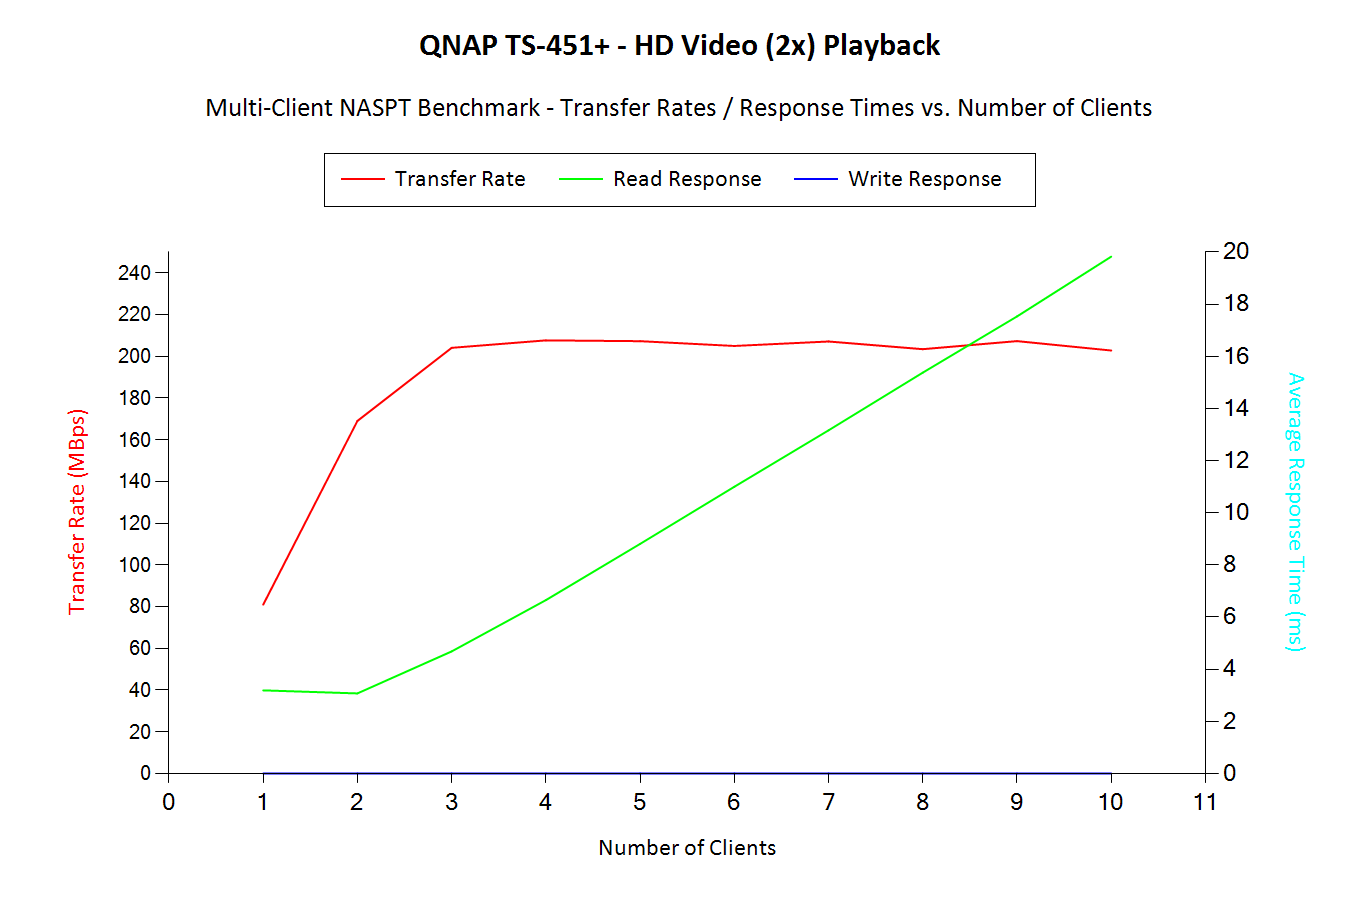 HD Video (2x) Playback - Multi-Client Benchmark